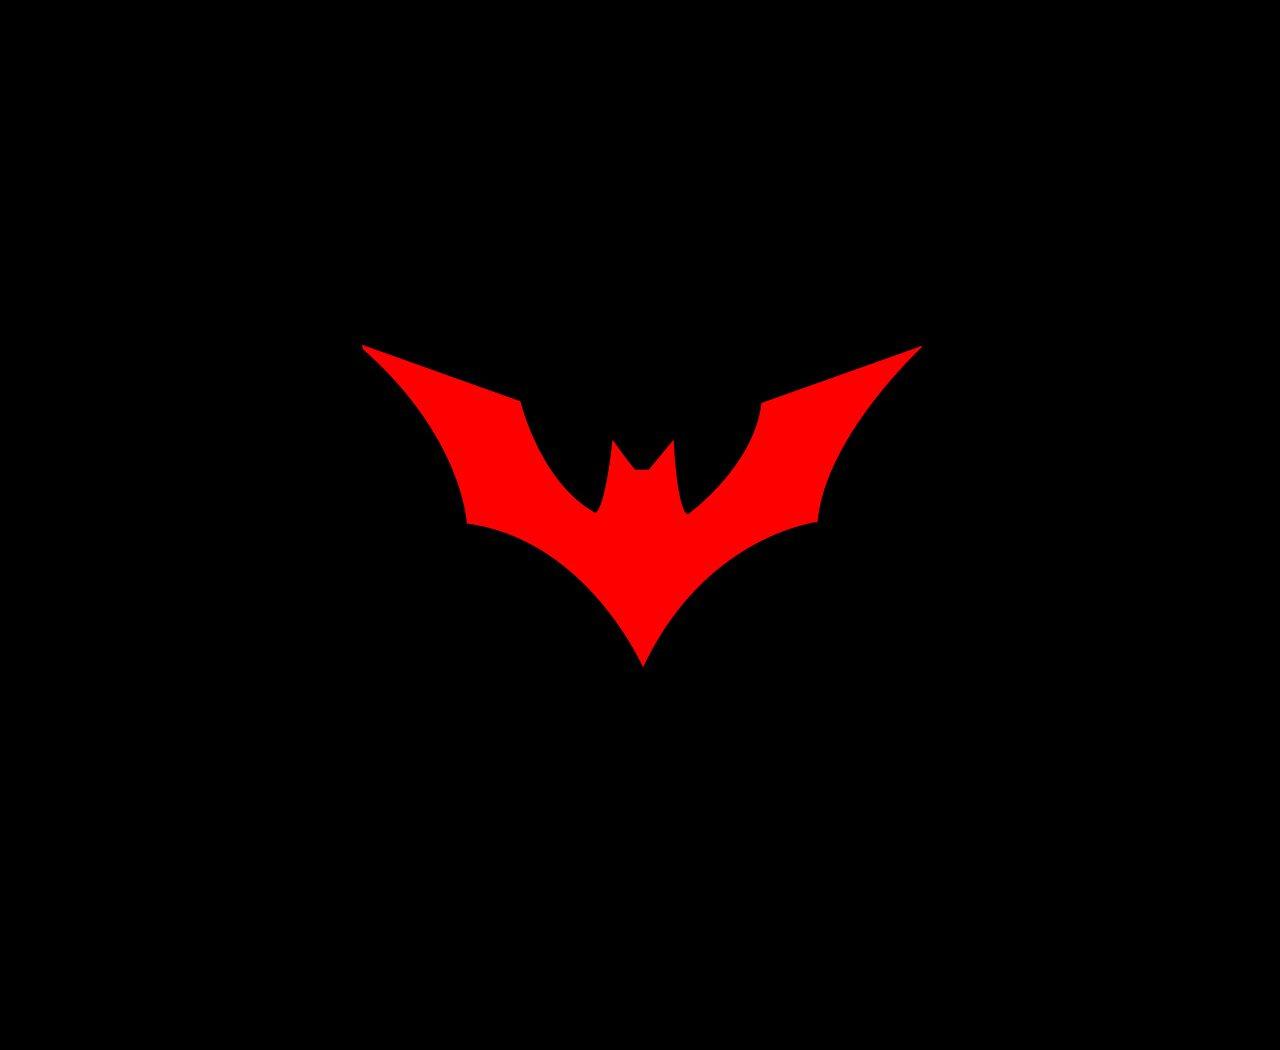 Cool Red Logo - Cool Minimalist Batman Logo Wallpaper In Black And Red | PaperPull